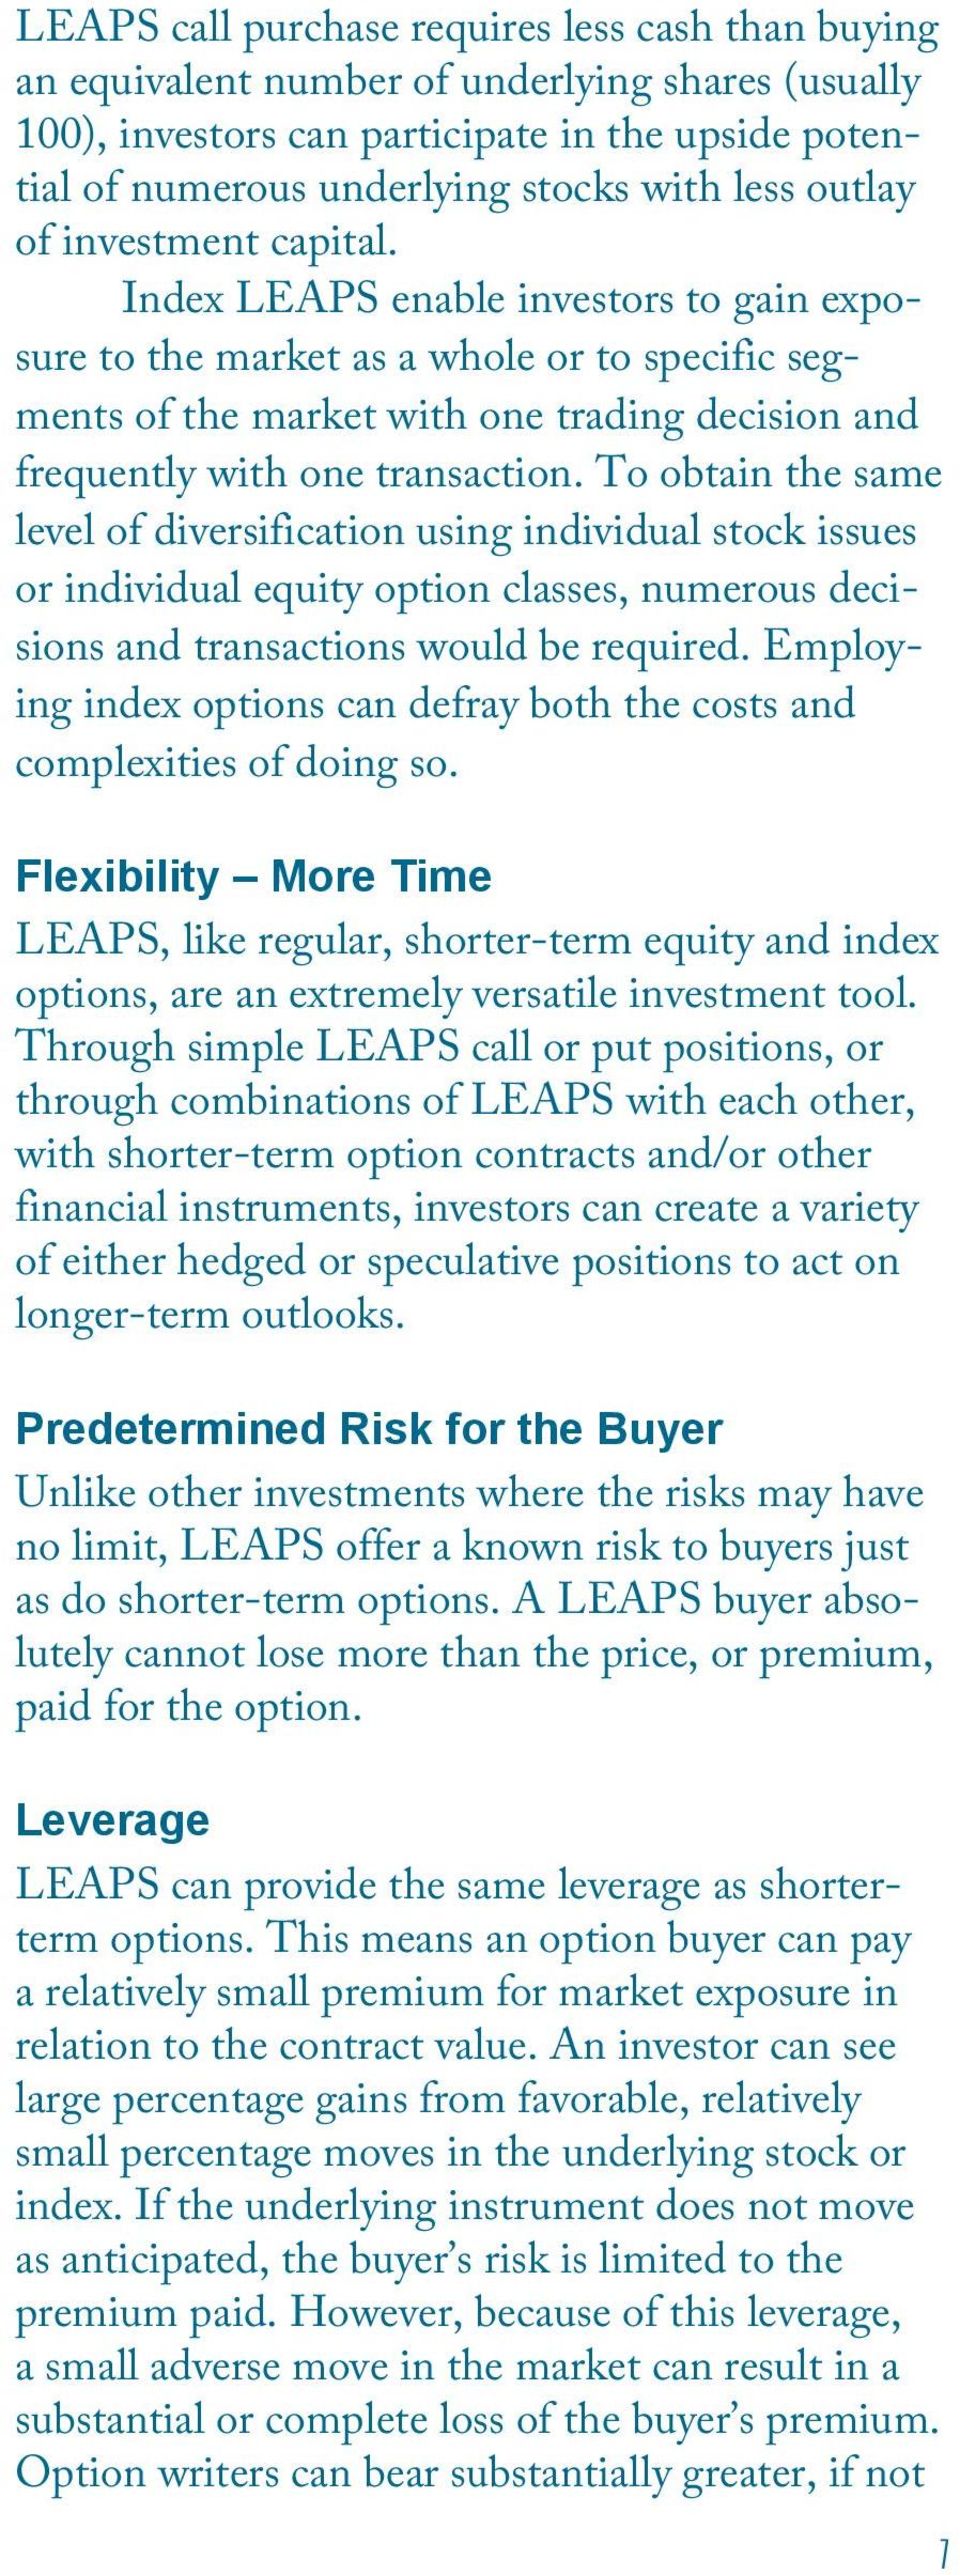 Index LEAPS enable investors to gain exposure to the market as a whole or to specific segments of the market with one trading decision and frequently with one transaction.